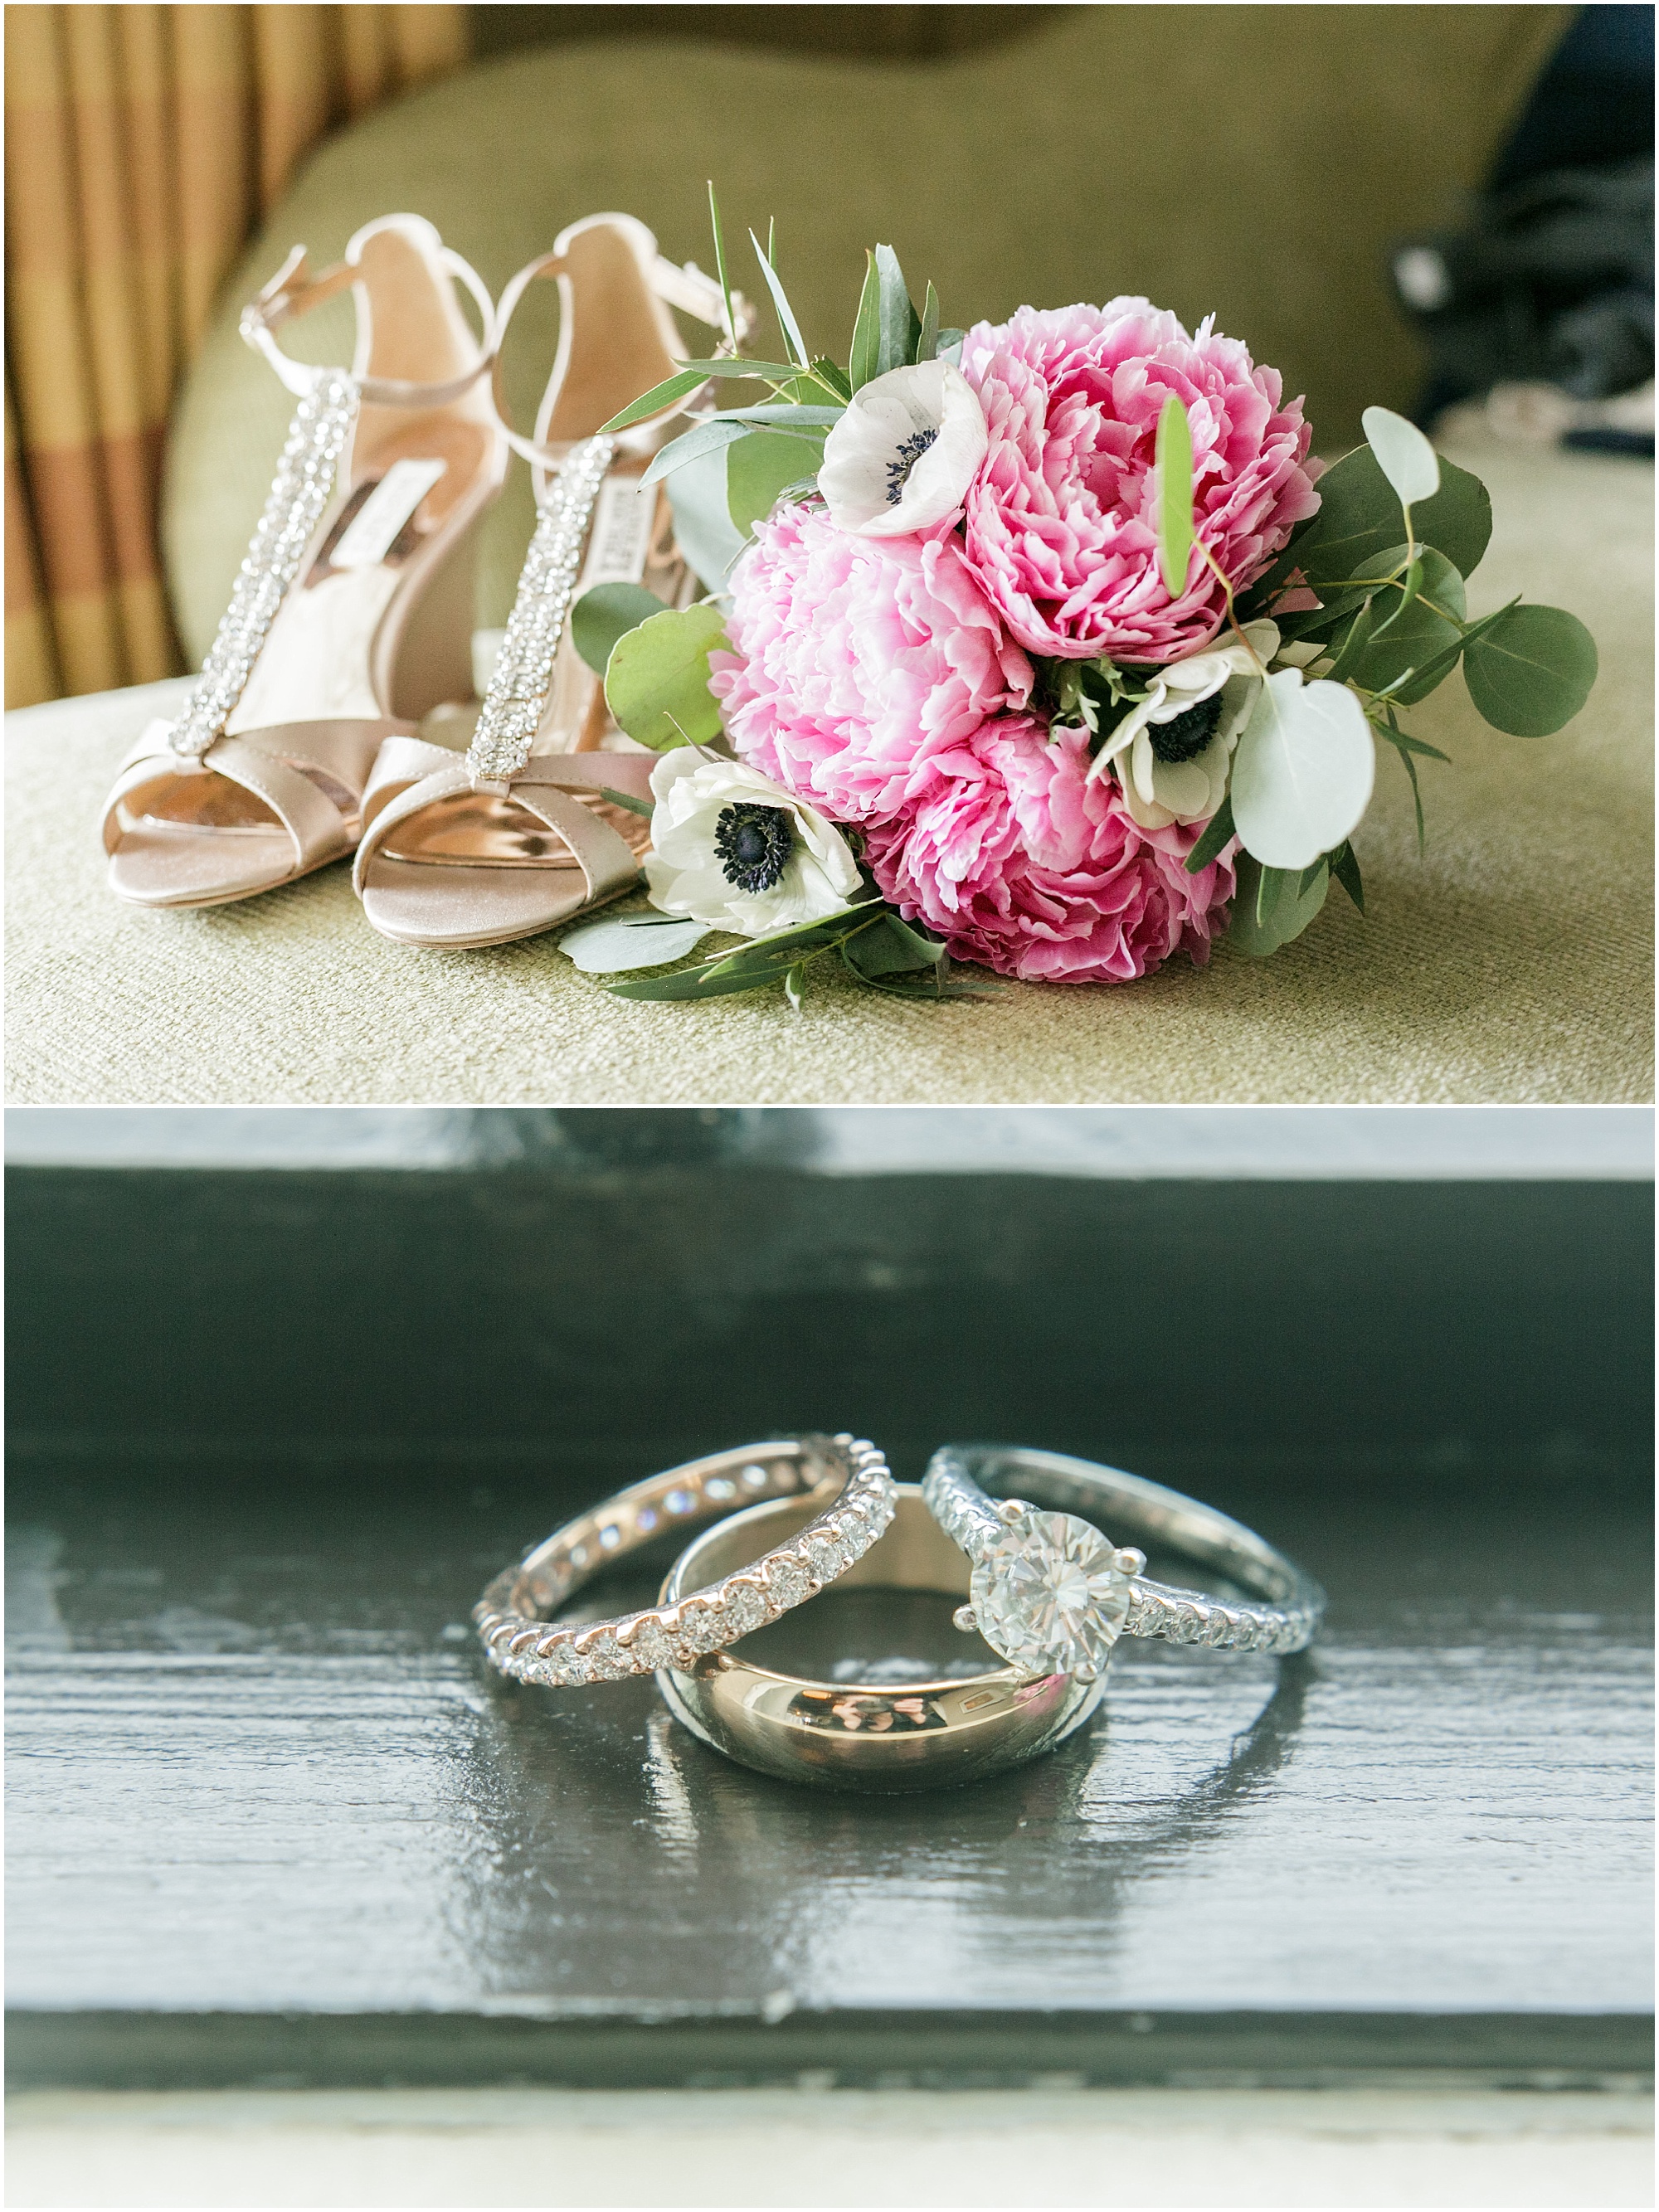 Wedding accessories including gold strappy shoes, a pink bouquet and wedding rings. 